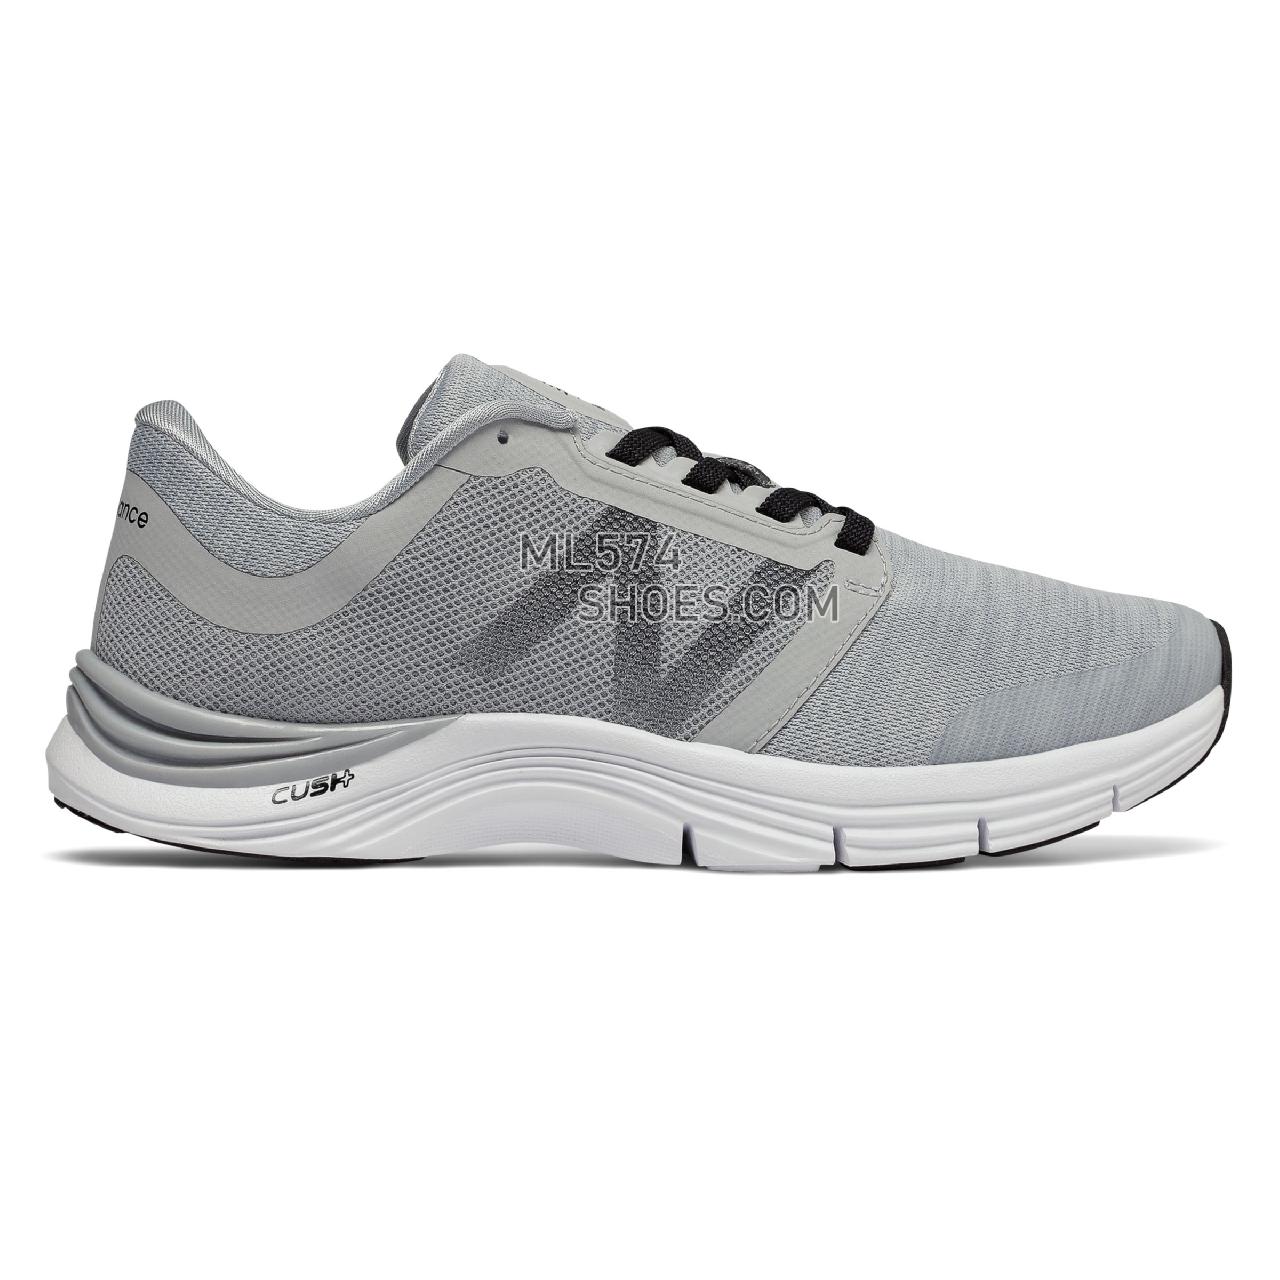 New Balance 715v3 - Women's 715v3 - Silver Mink with White and Black - WX715CG3